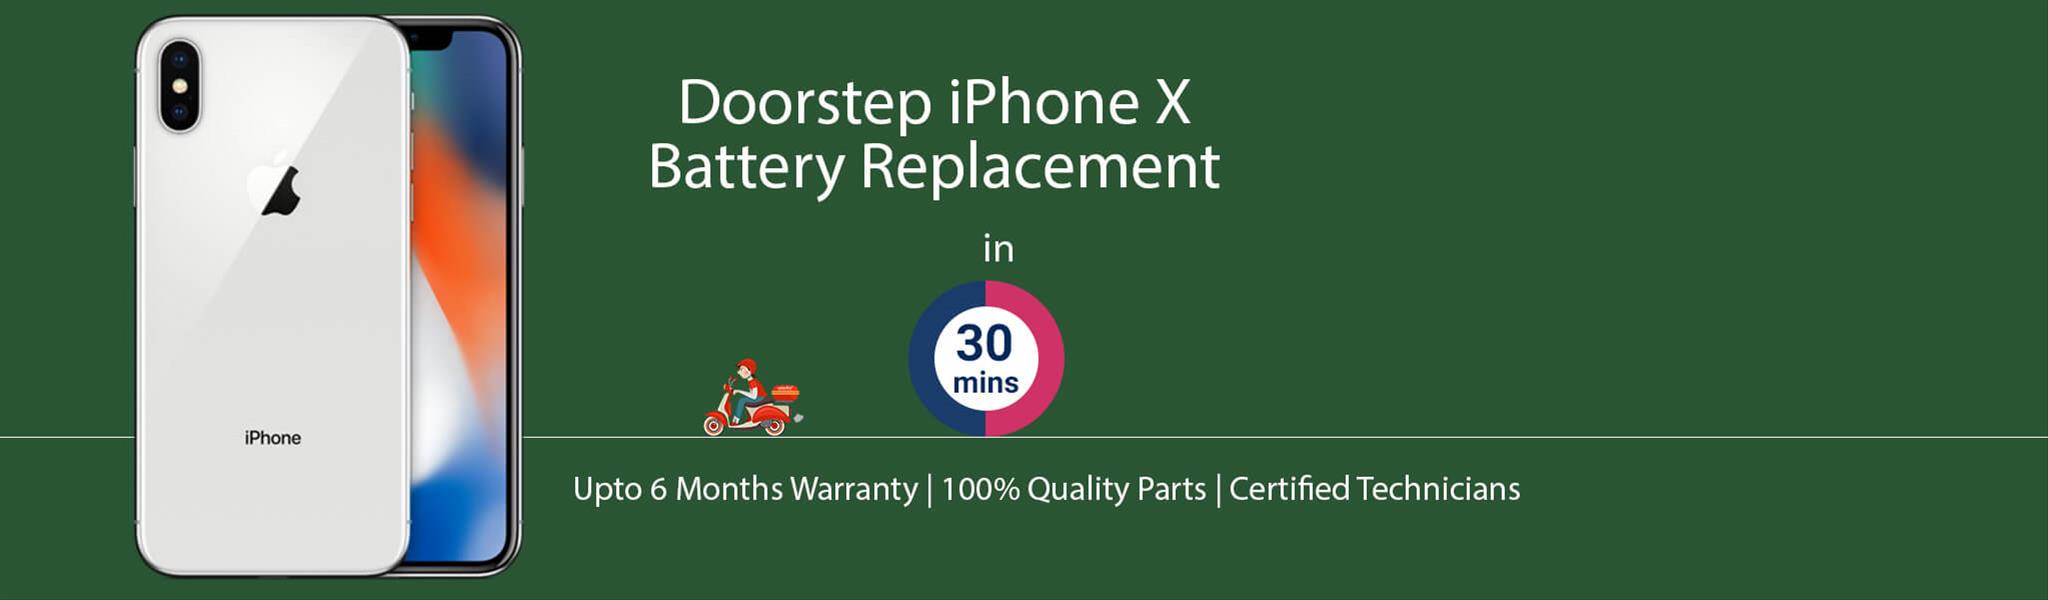 iphone-x-battery-replacement.jpg